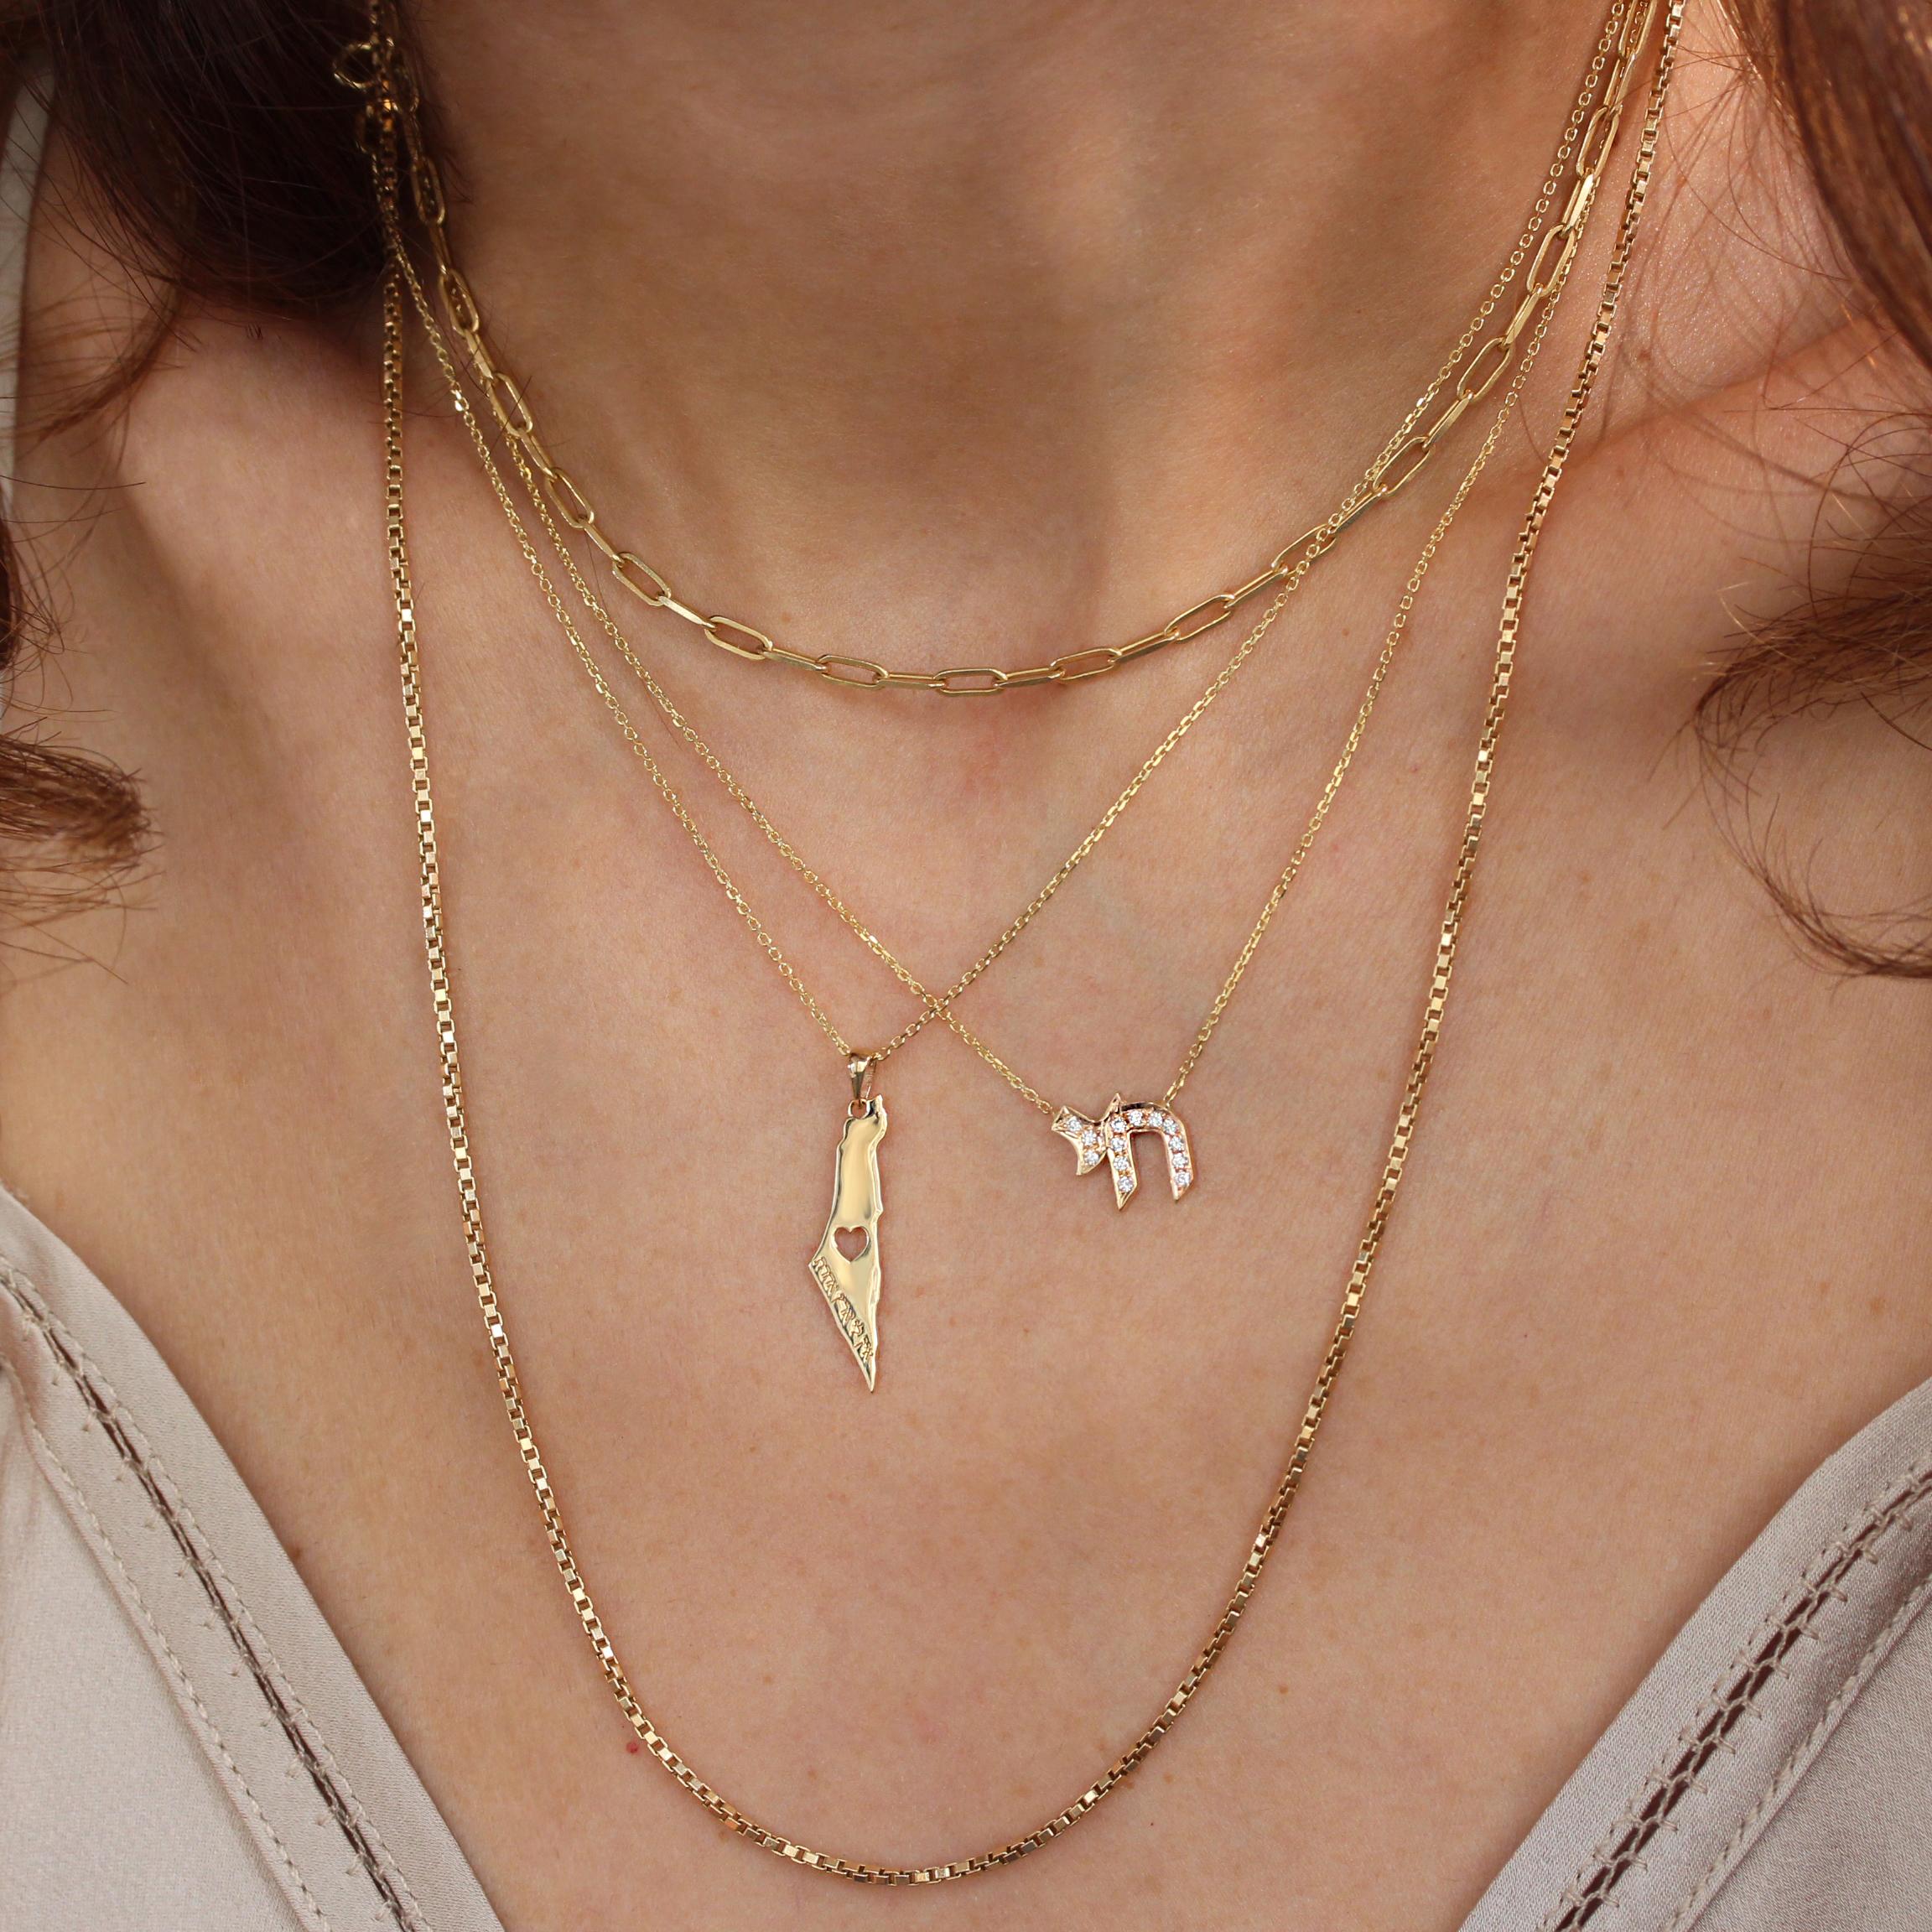 Am Israel Chai gold Pendant Necklace featuring the map of Israel intricately crafted with a heart-shaped void, symbolizing love for the nation. The pendant is designed with an engraved Hebrew inscription, expressing a deep connection and pride. This